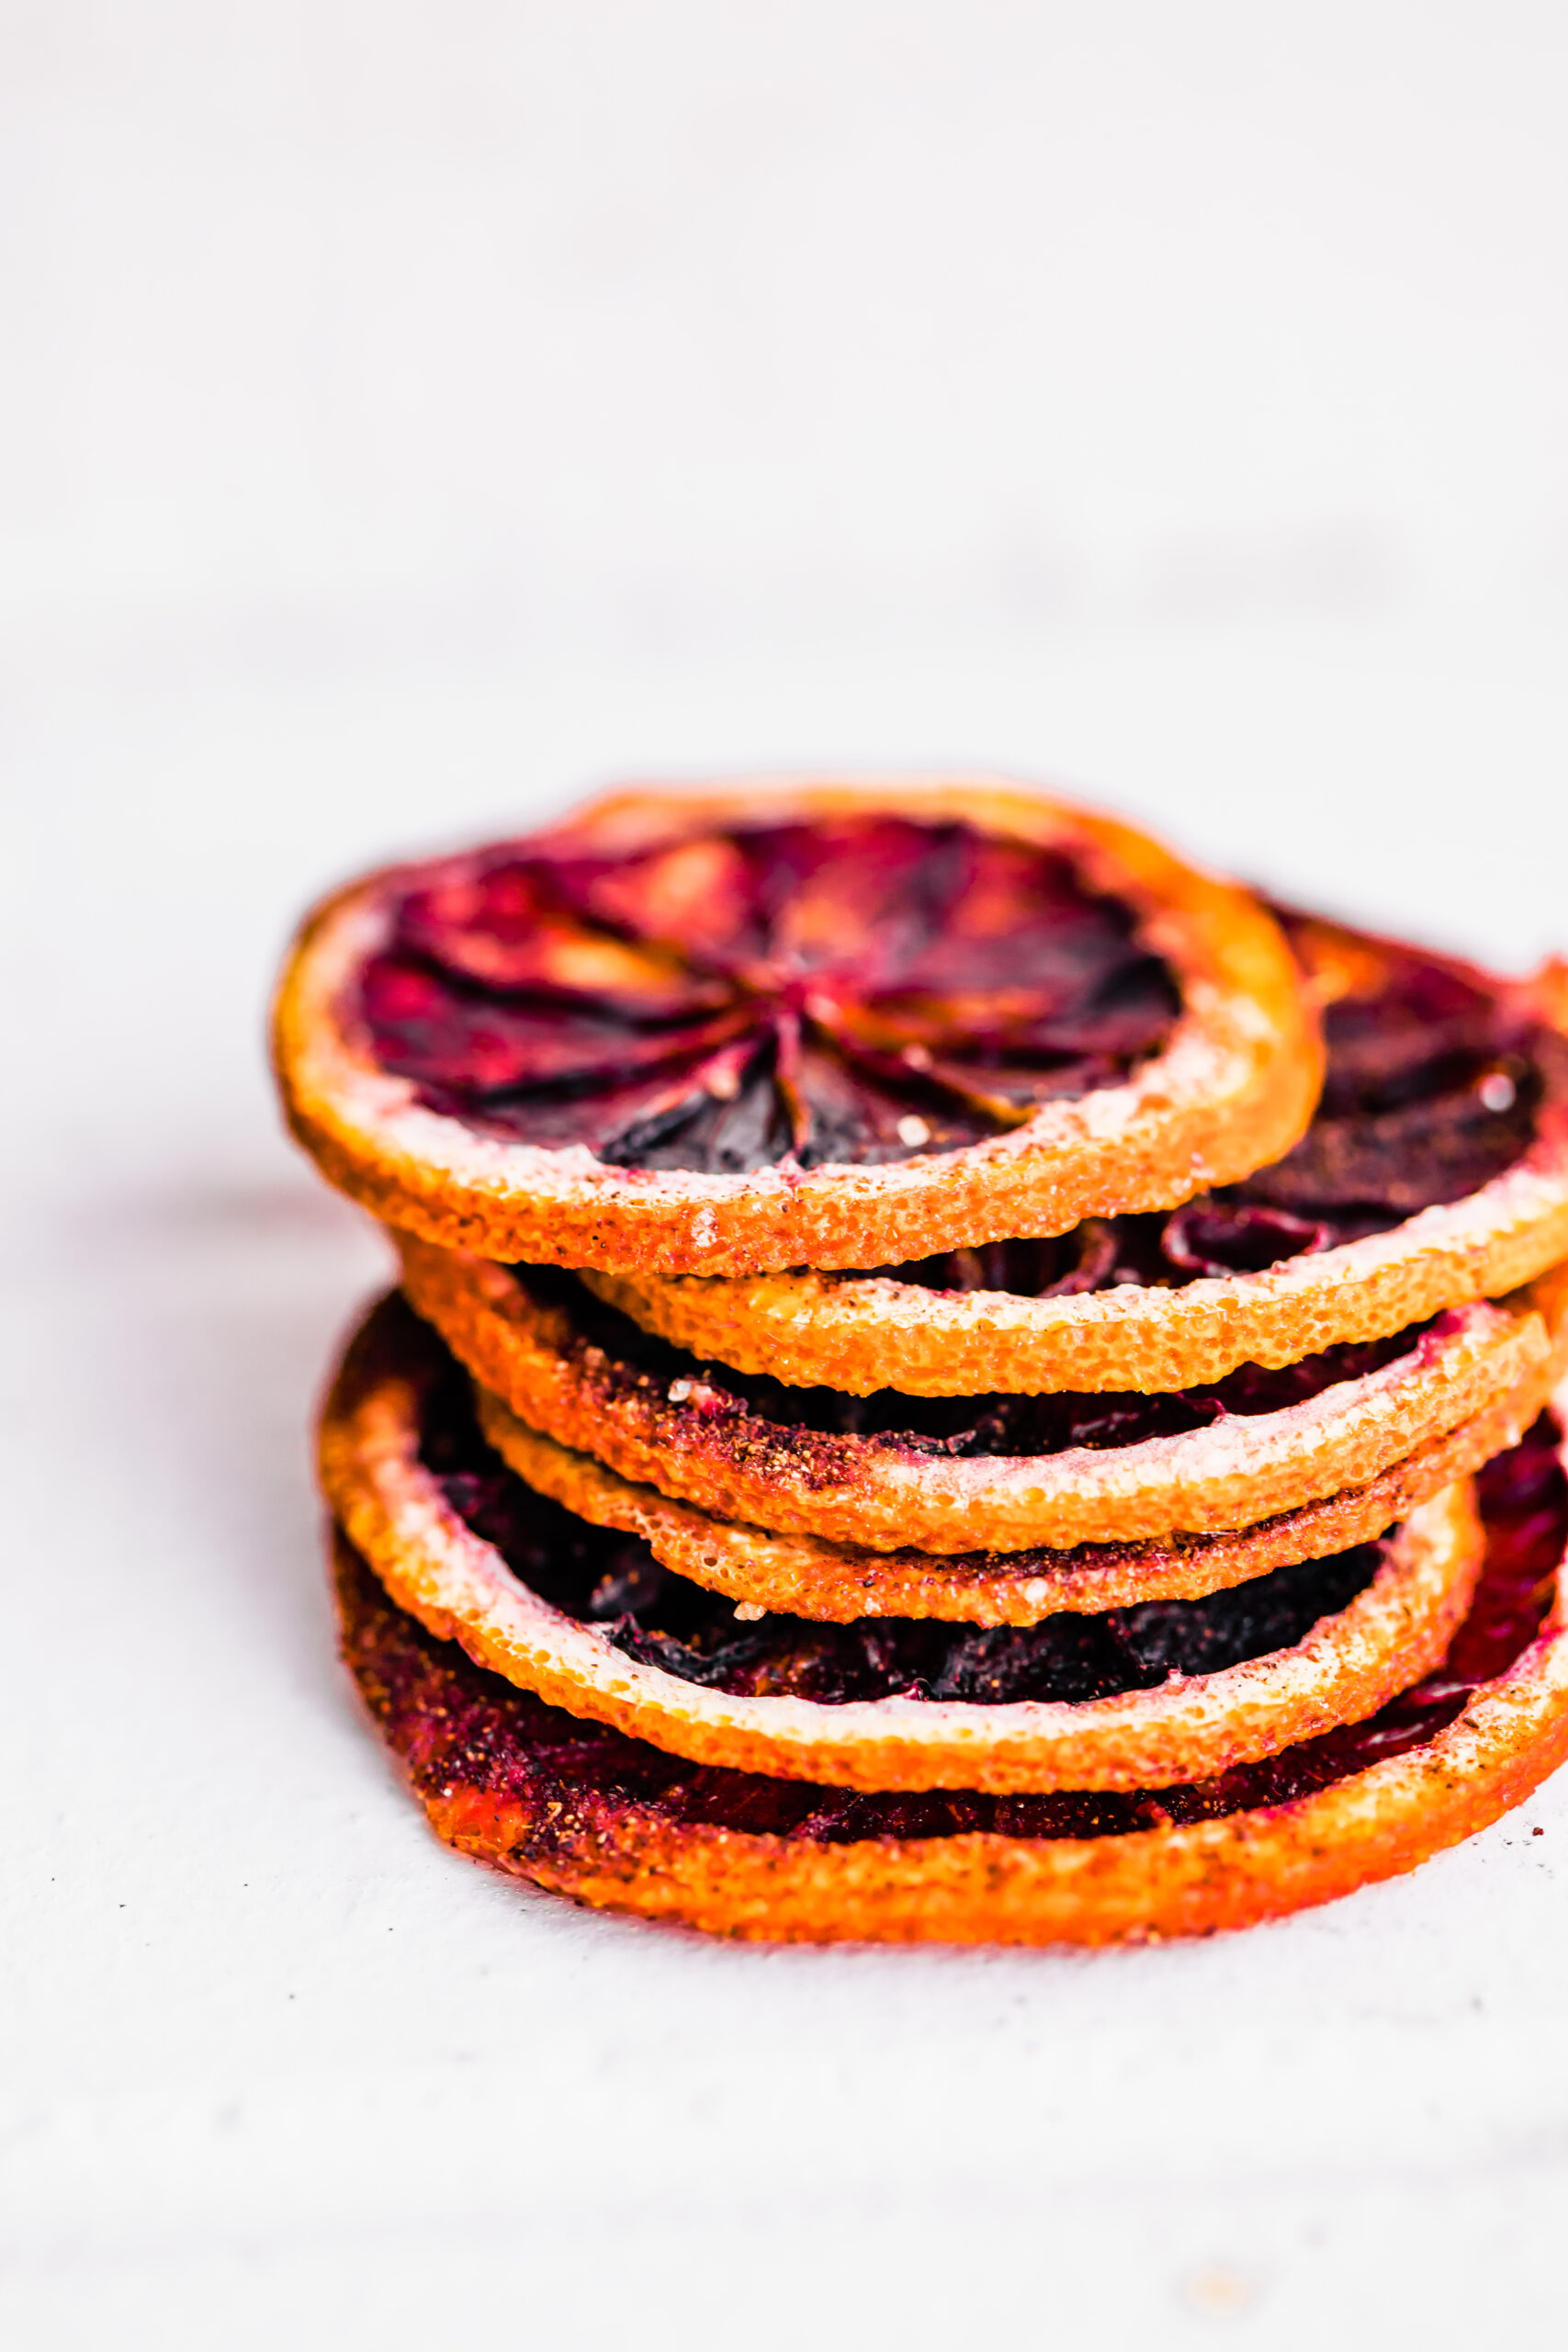 Dried Orange Slices (Oven or Dehydrator)